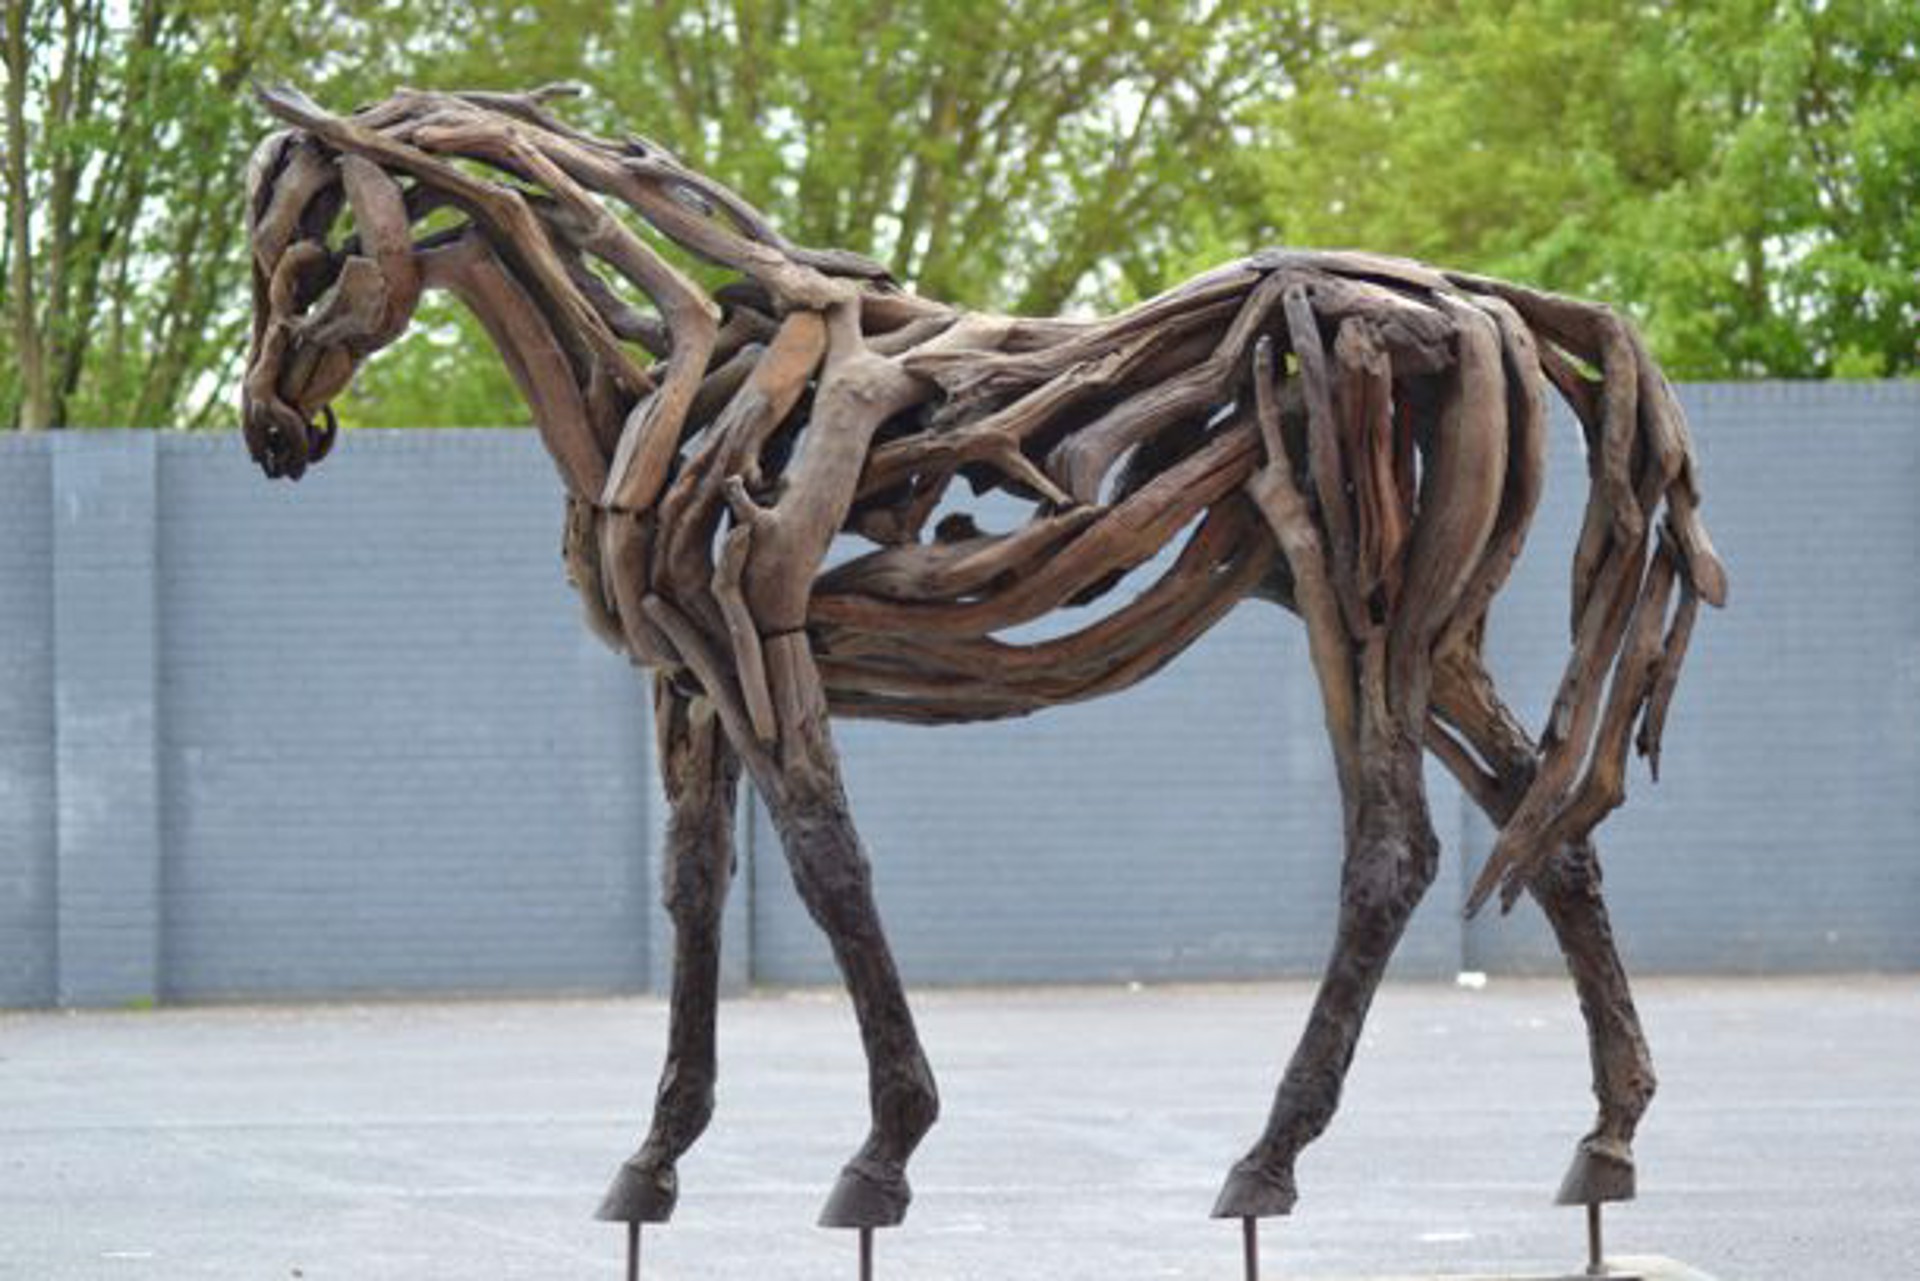 Forget Me Not by Heather Jansch